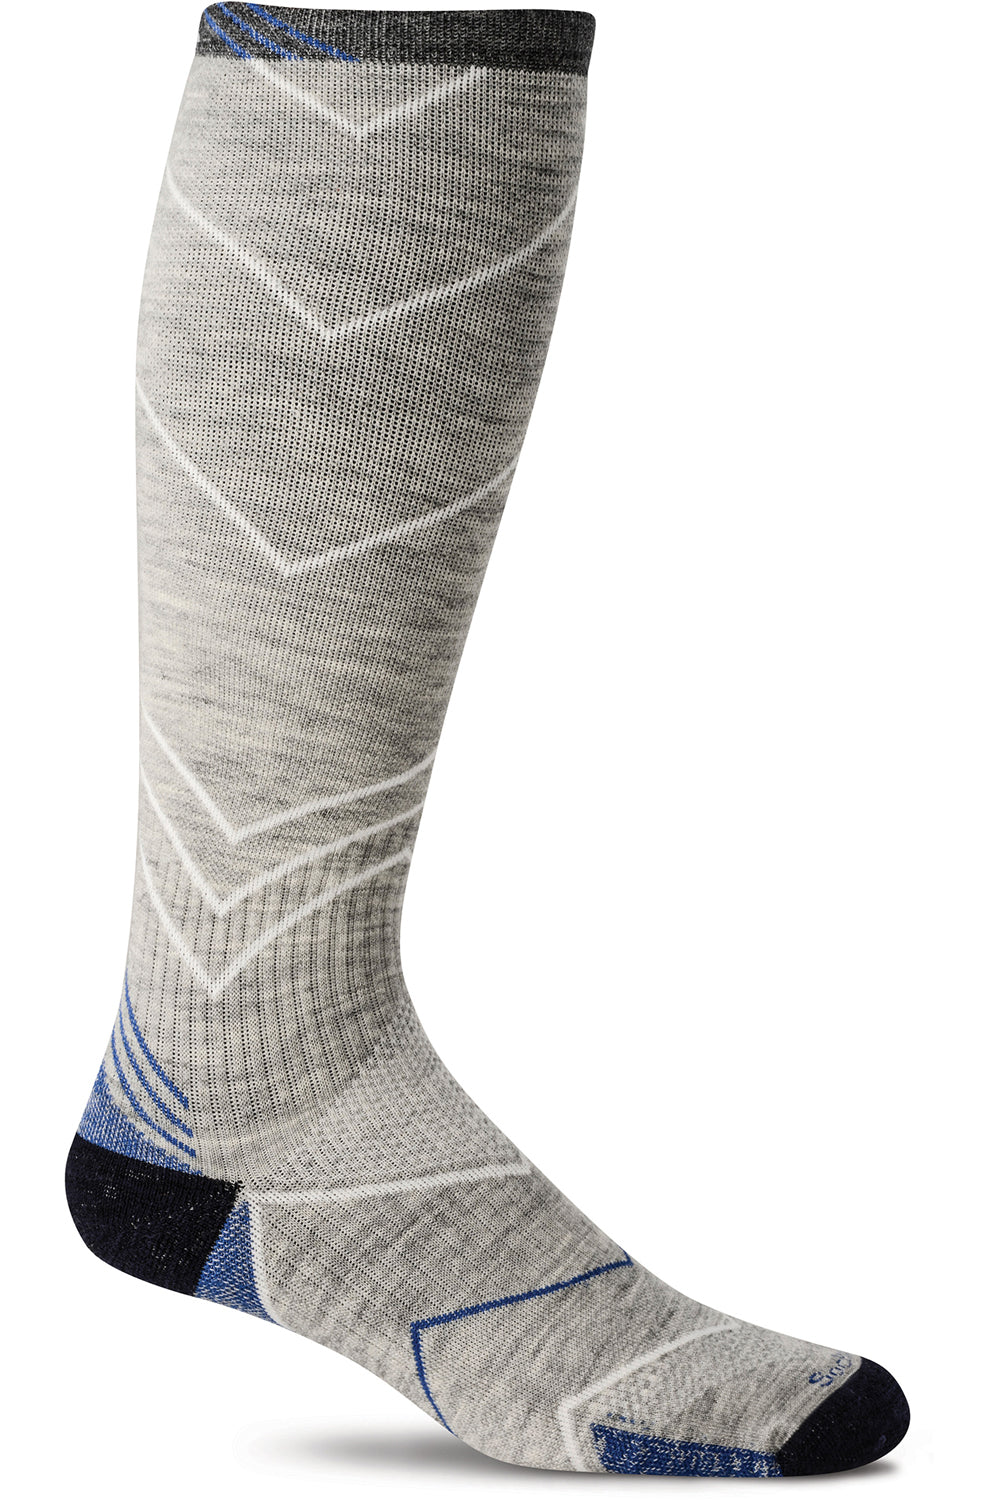 Sockwell Men's Incline Over-The-Calf Moderate Graduated Compression Sock in Grey color from the side